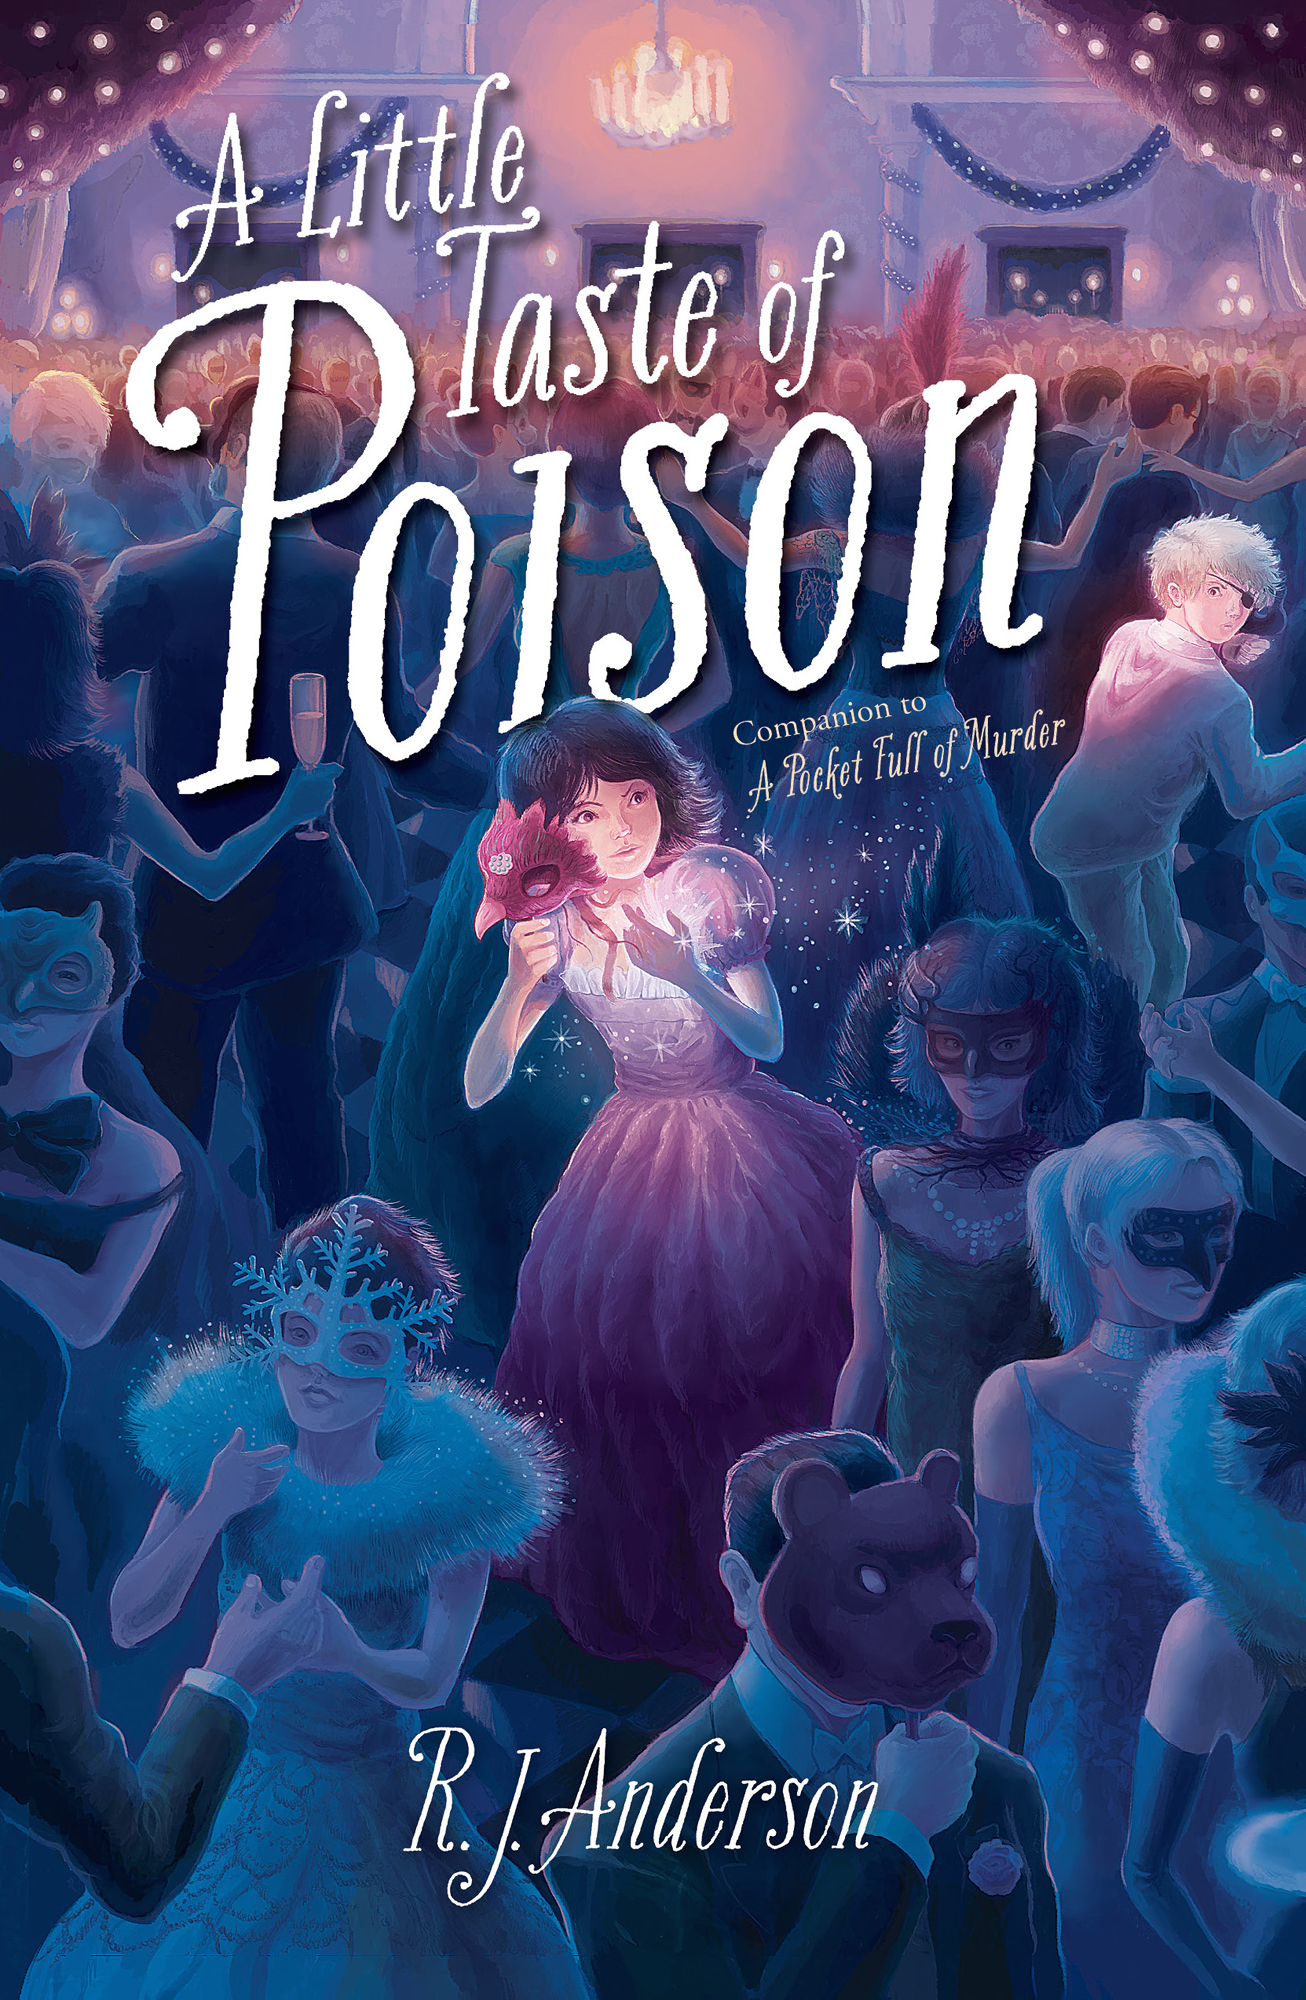 A Little Taste of Poison by R. J. Anderson